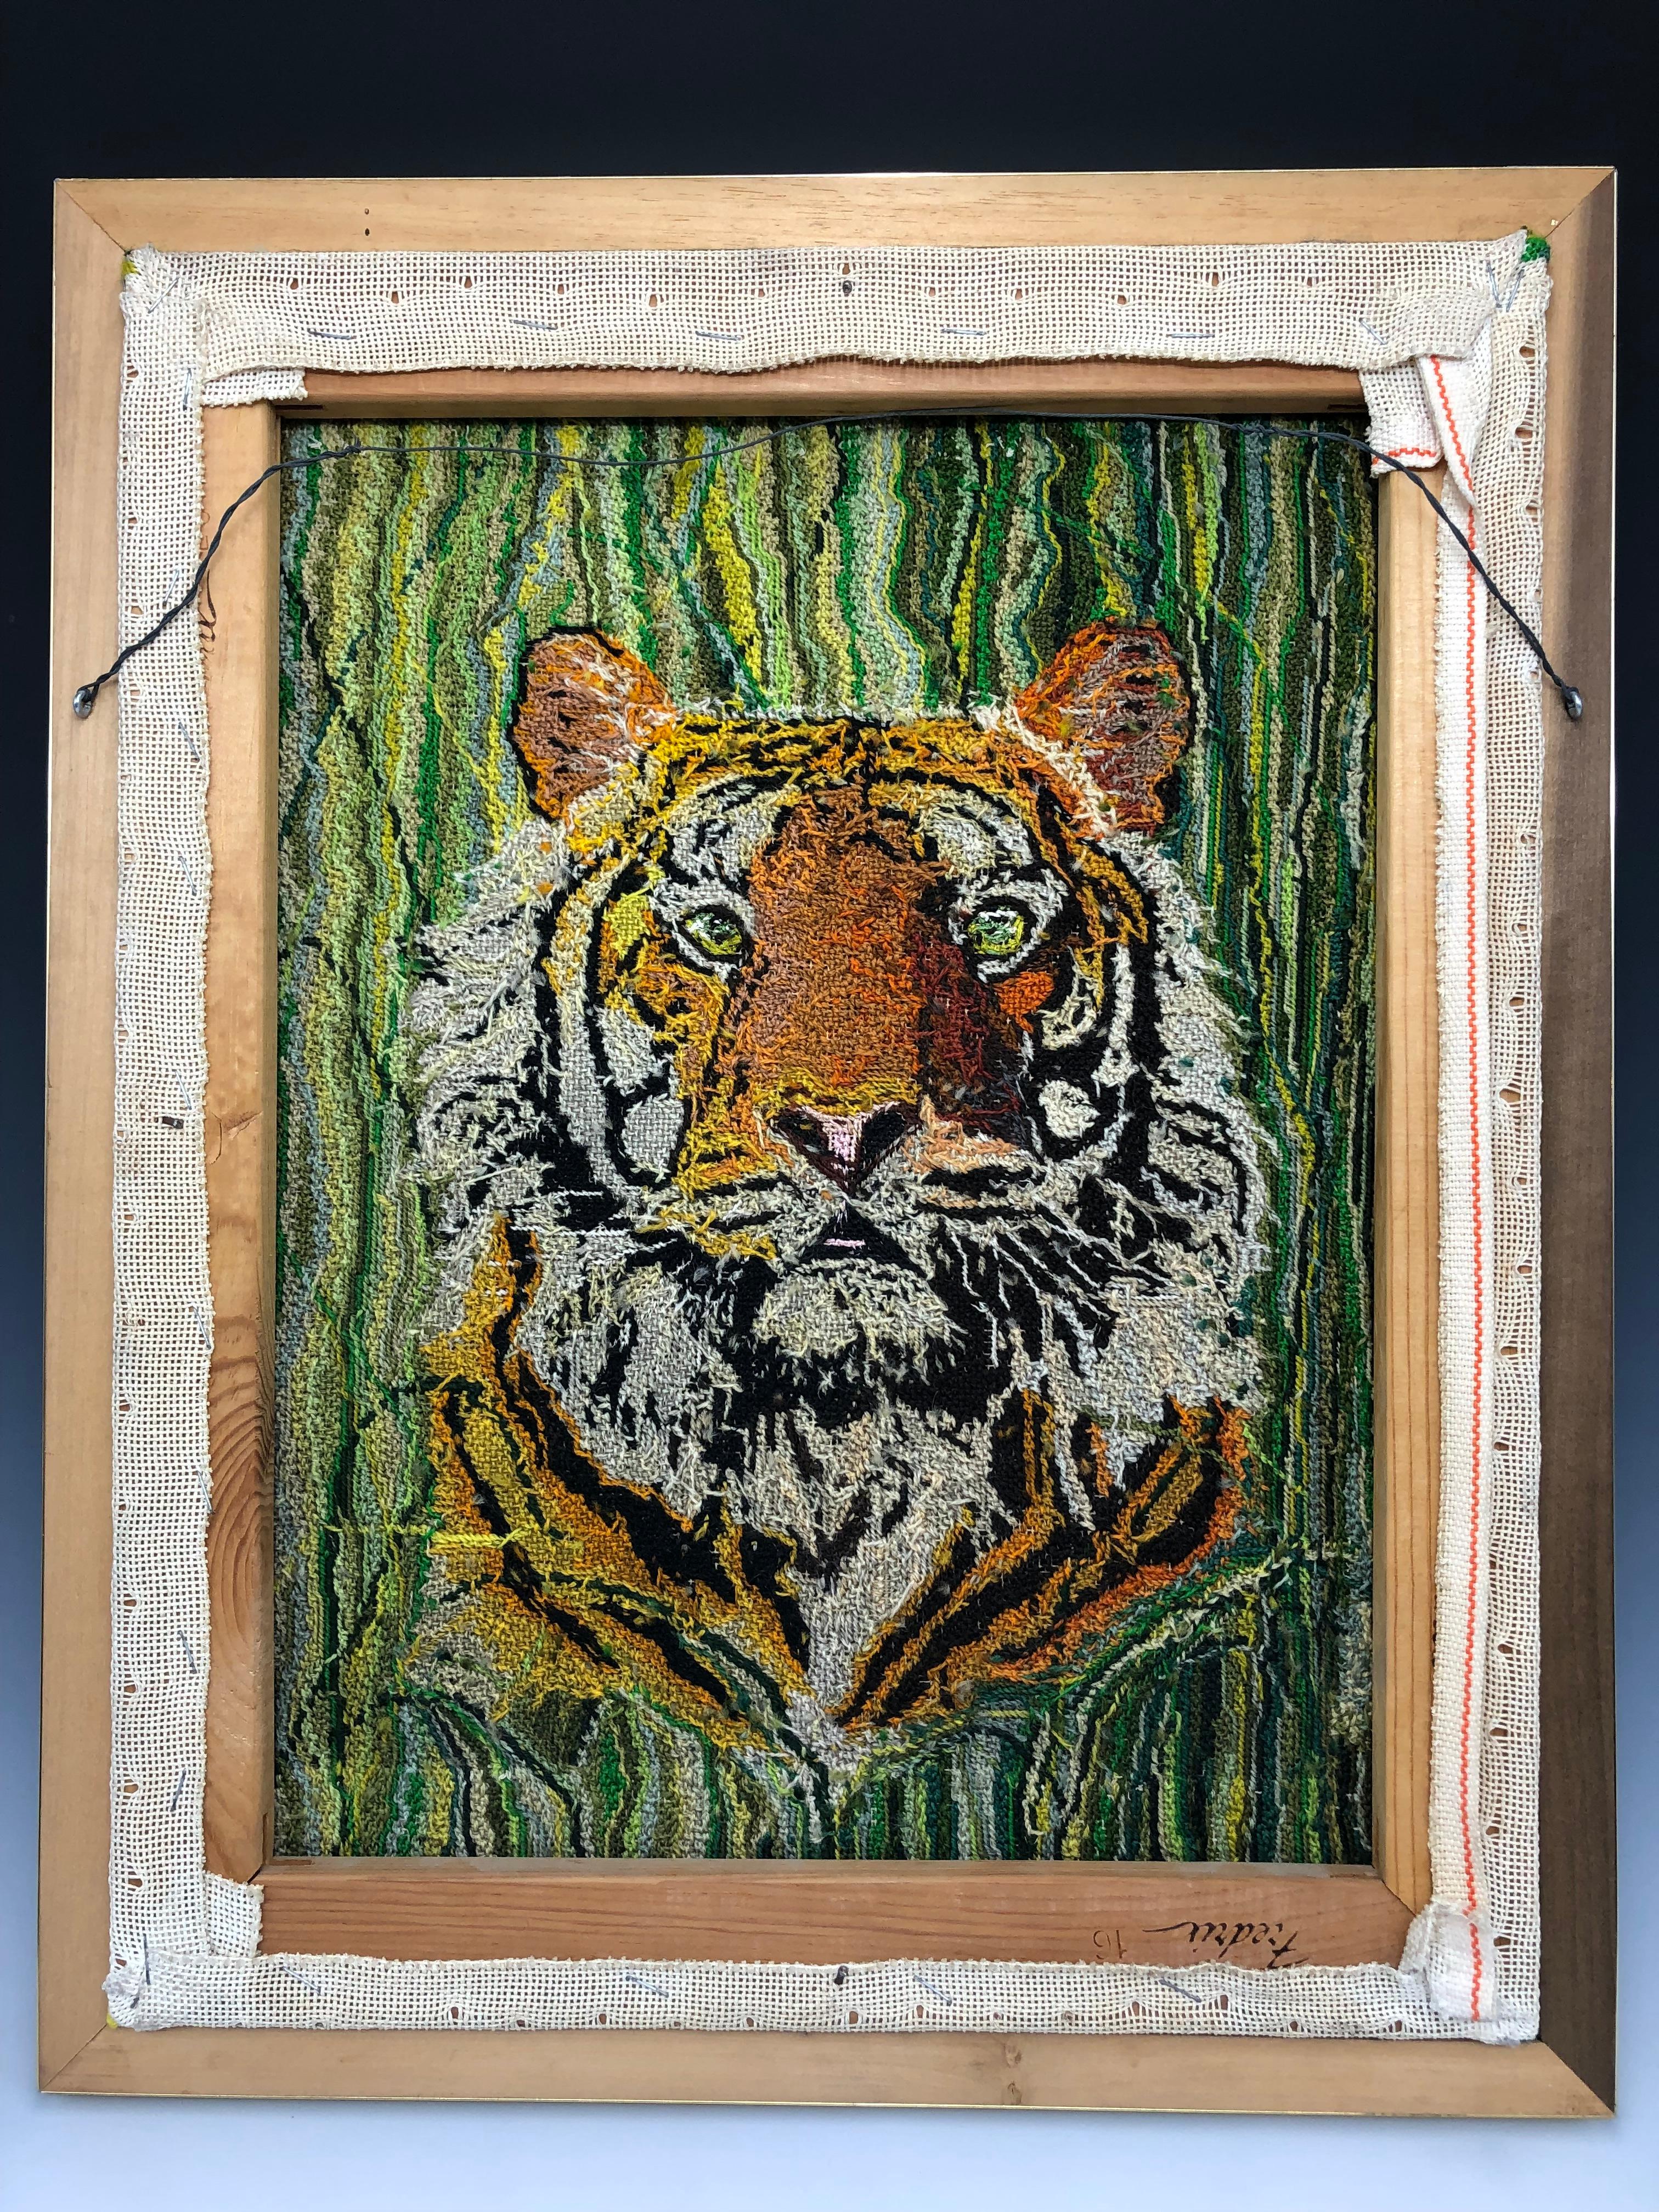 Embroidered Vintage 1970s Tiger Portrait, Needlepoint Embroidery in Brass Frame For Sale